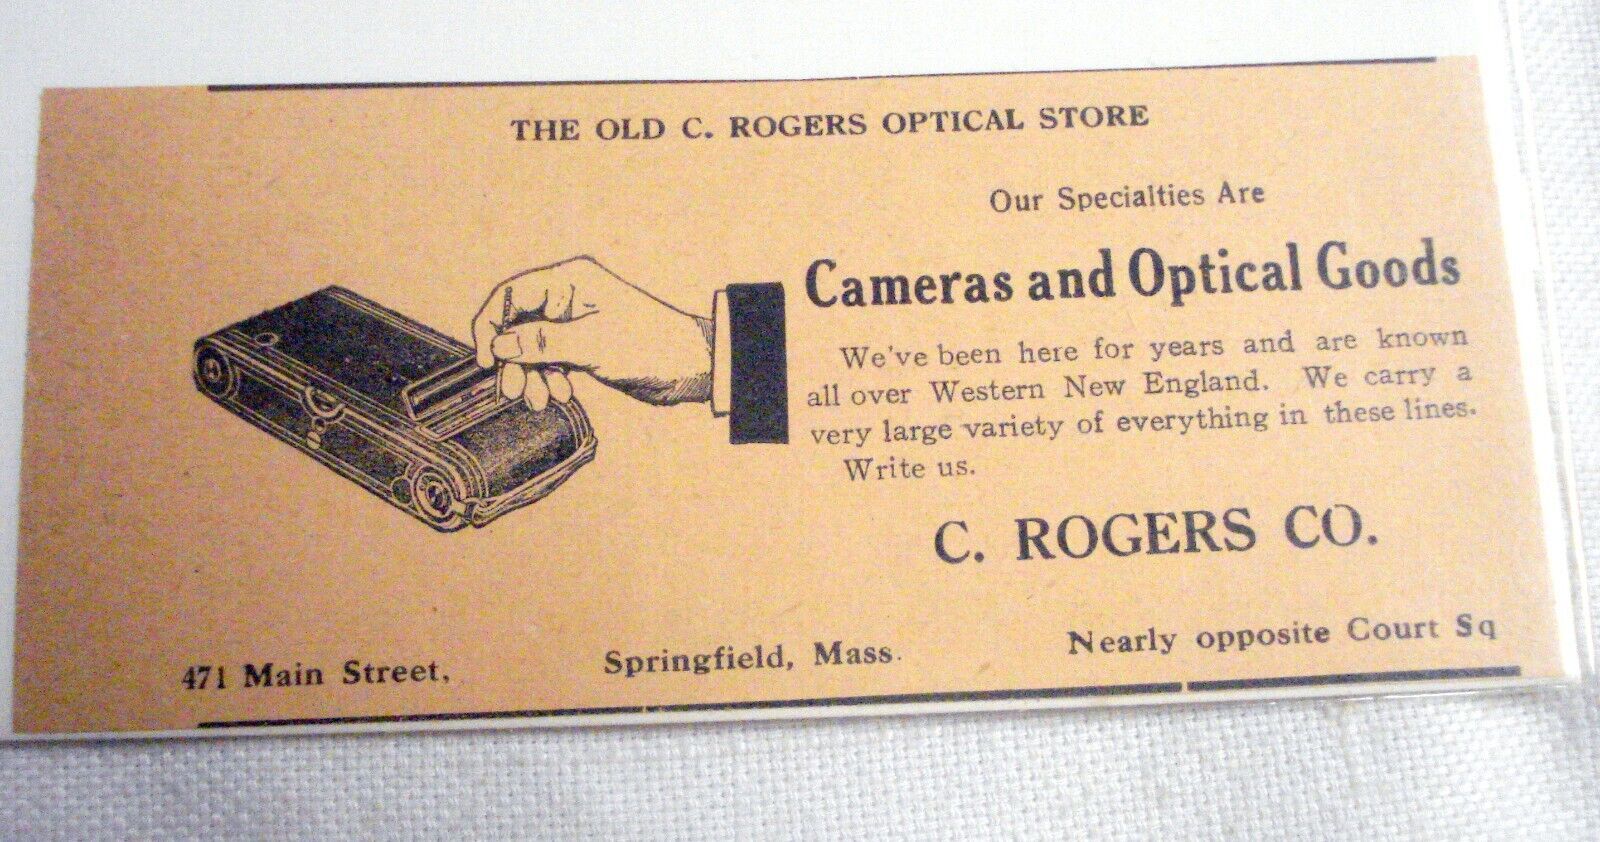 Primary image for 1918 Ad C. Rogers Co. Camera and Optical Goods Store Springfield, Mass.